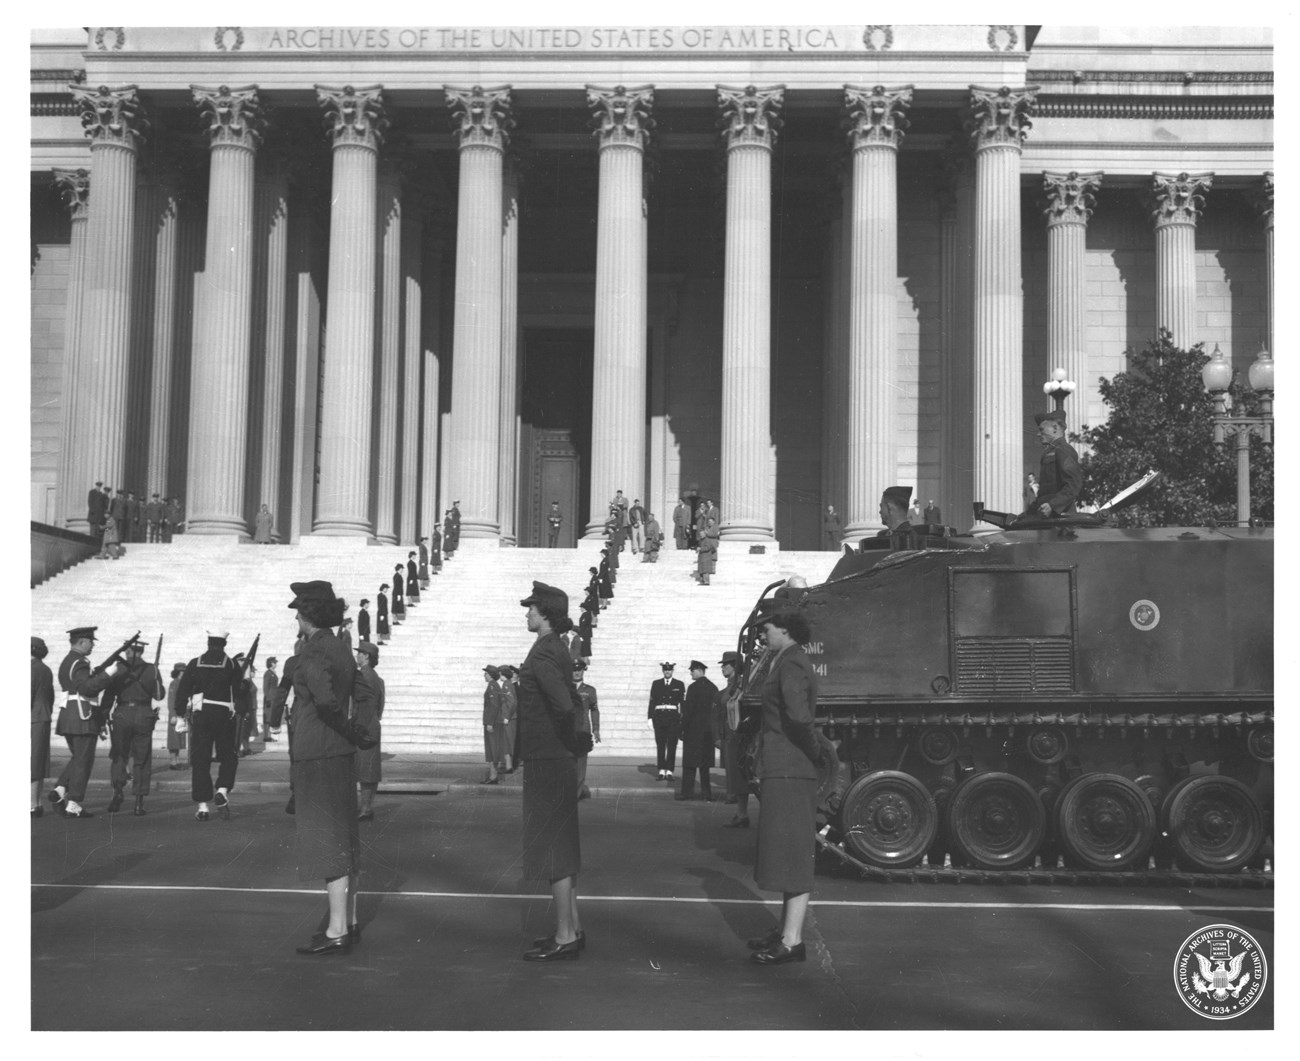 A procession of military personnel, both men and women, with an armored tank in front of the National Archives building.